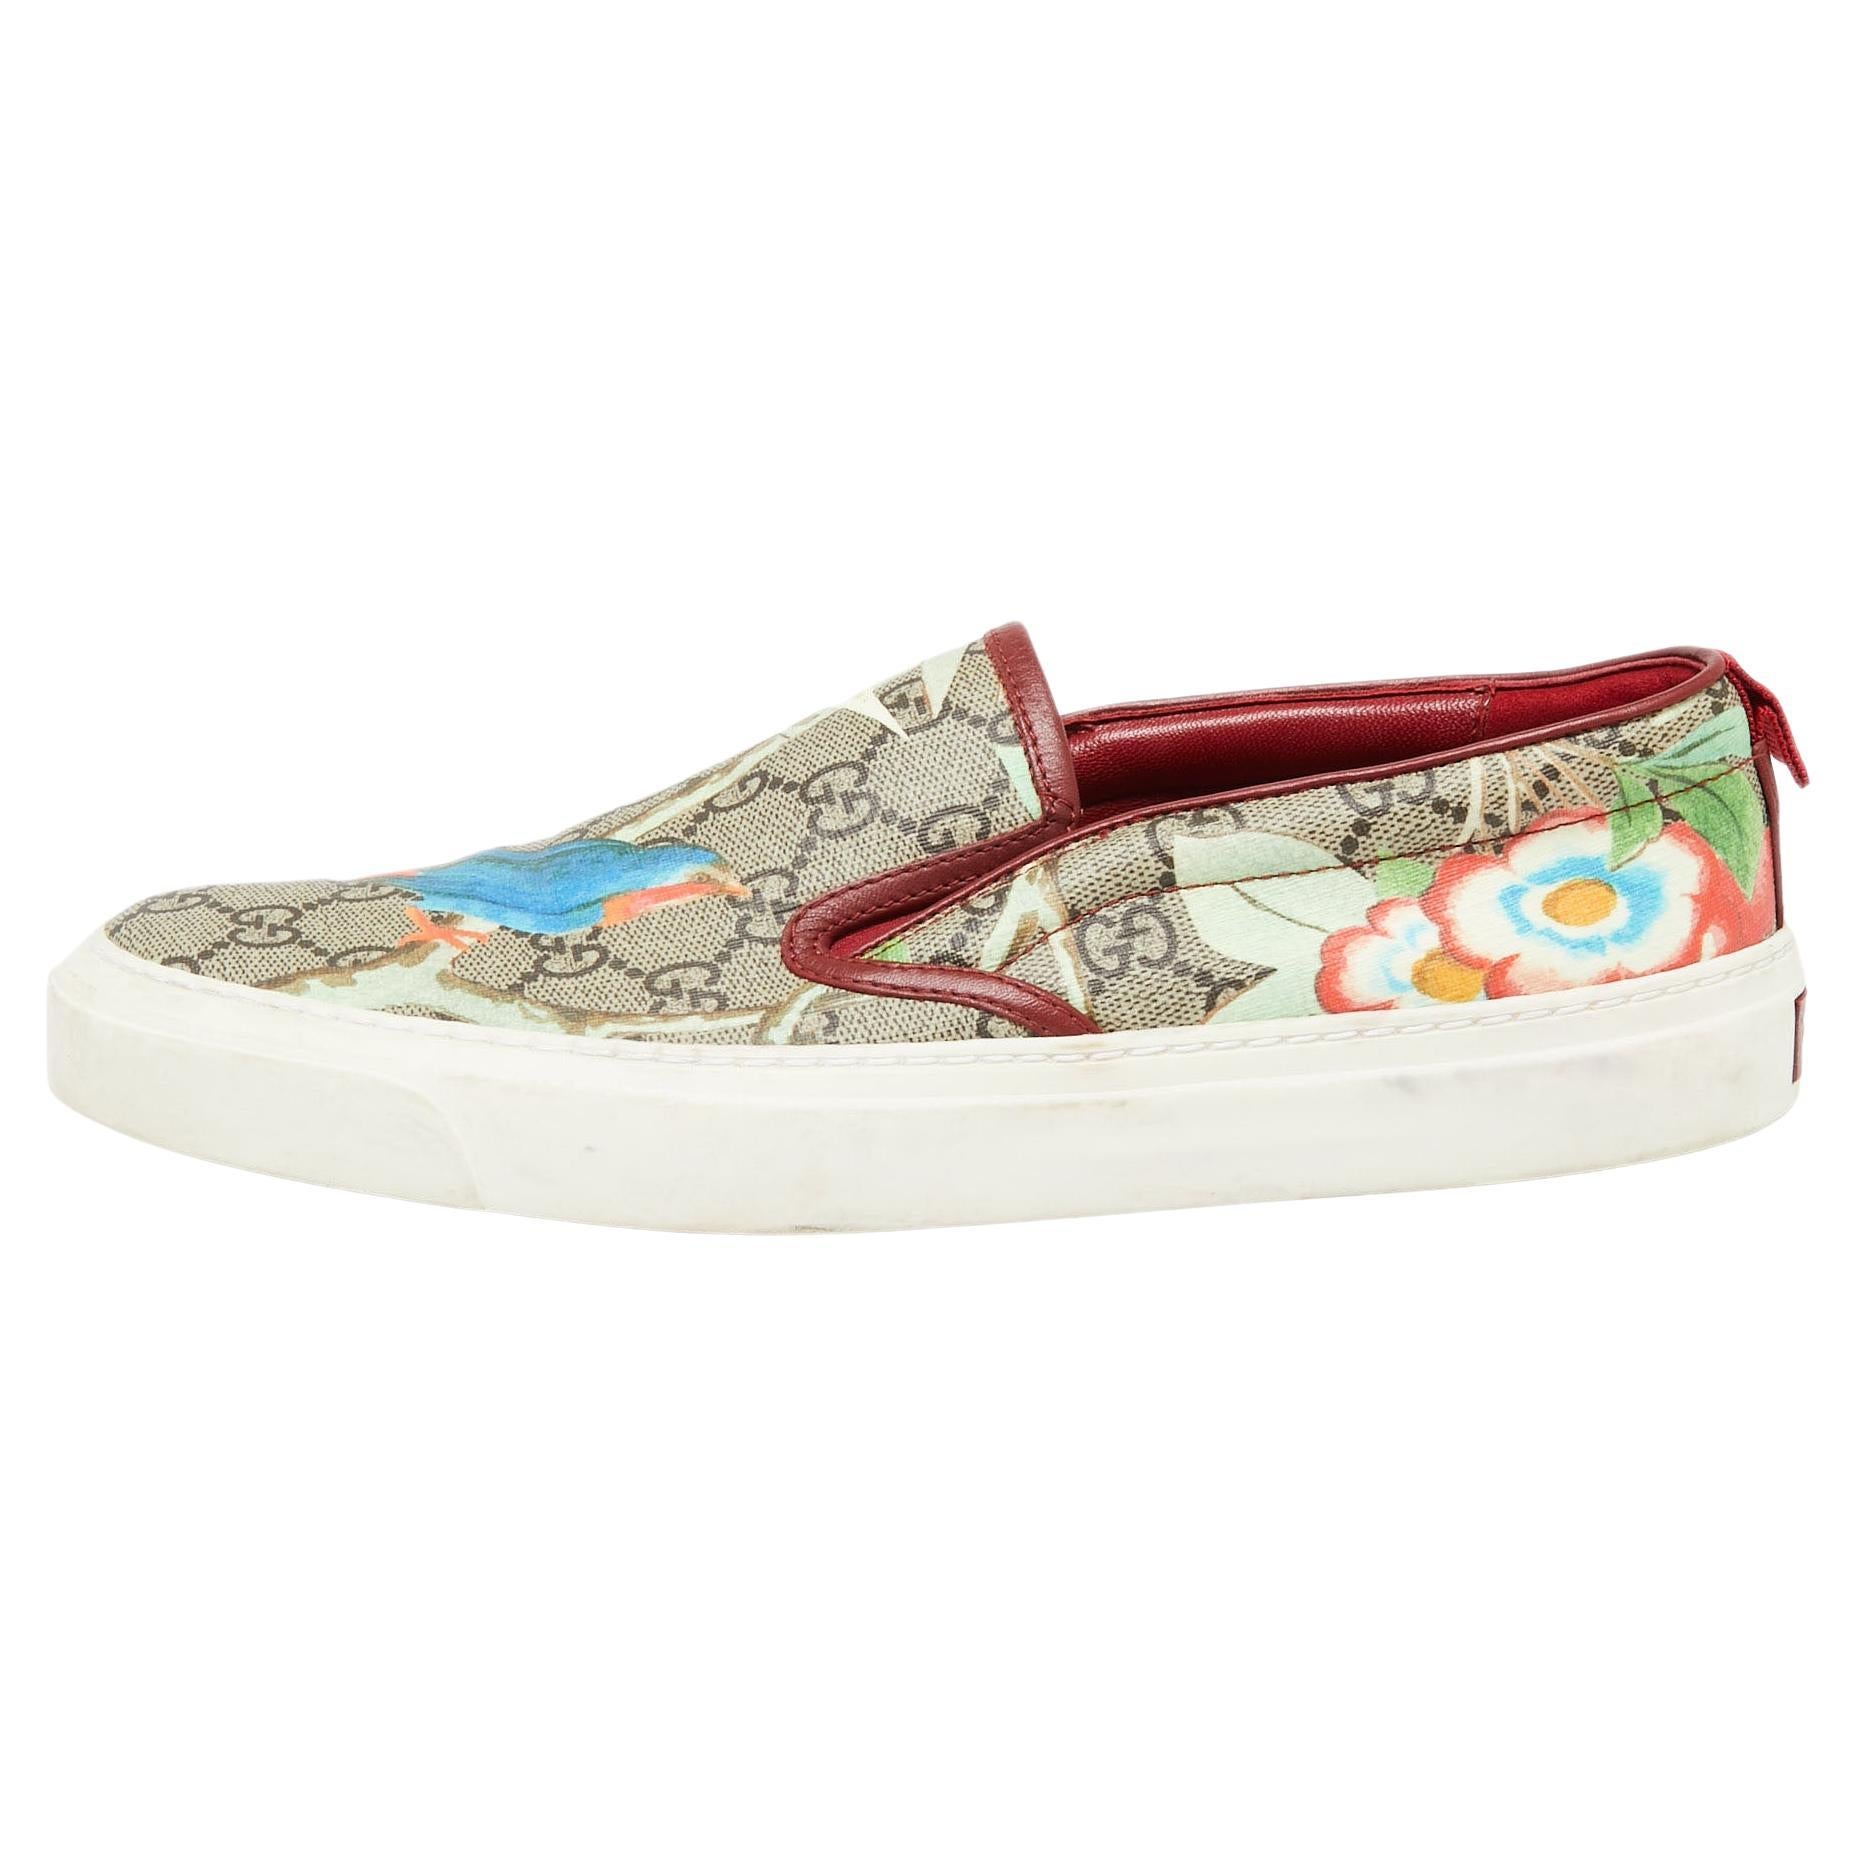 Gucci Multicolor GG Supreme Blooms Printed Canvas Slip On Sneakers Size 40